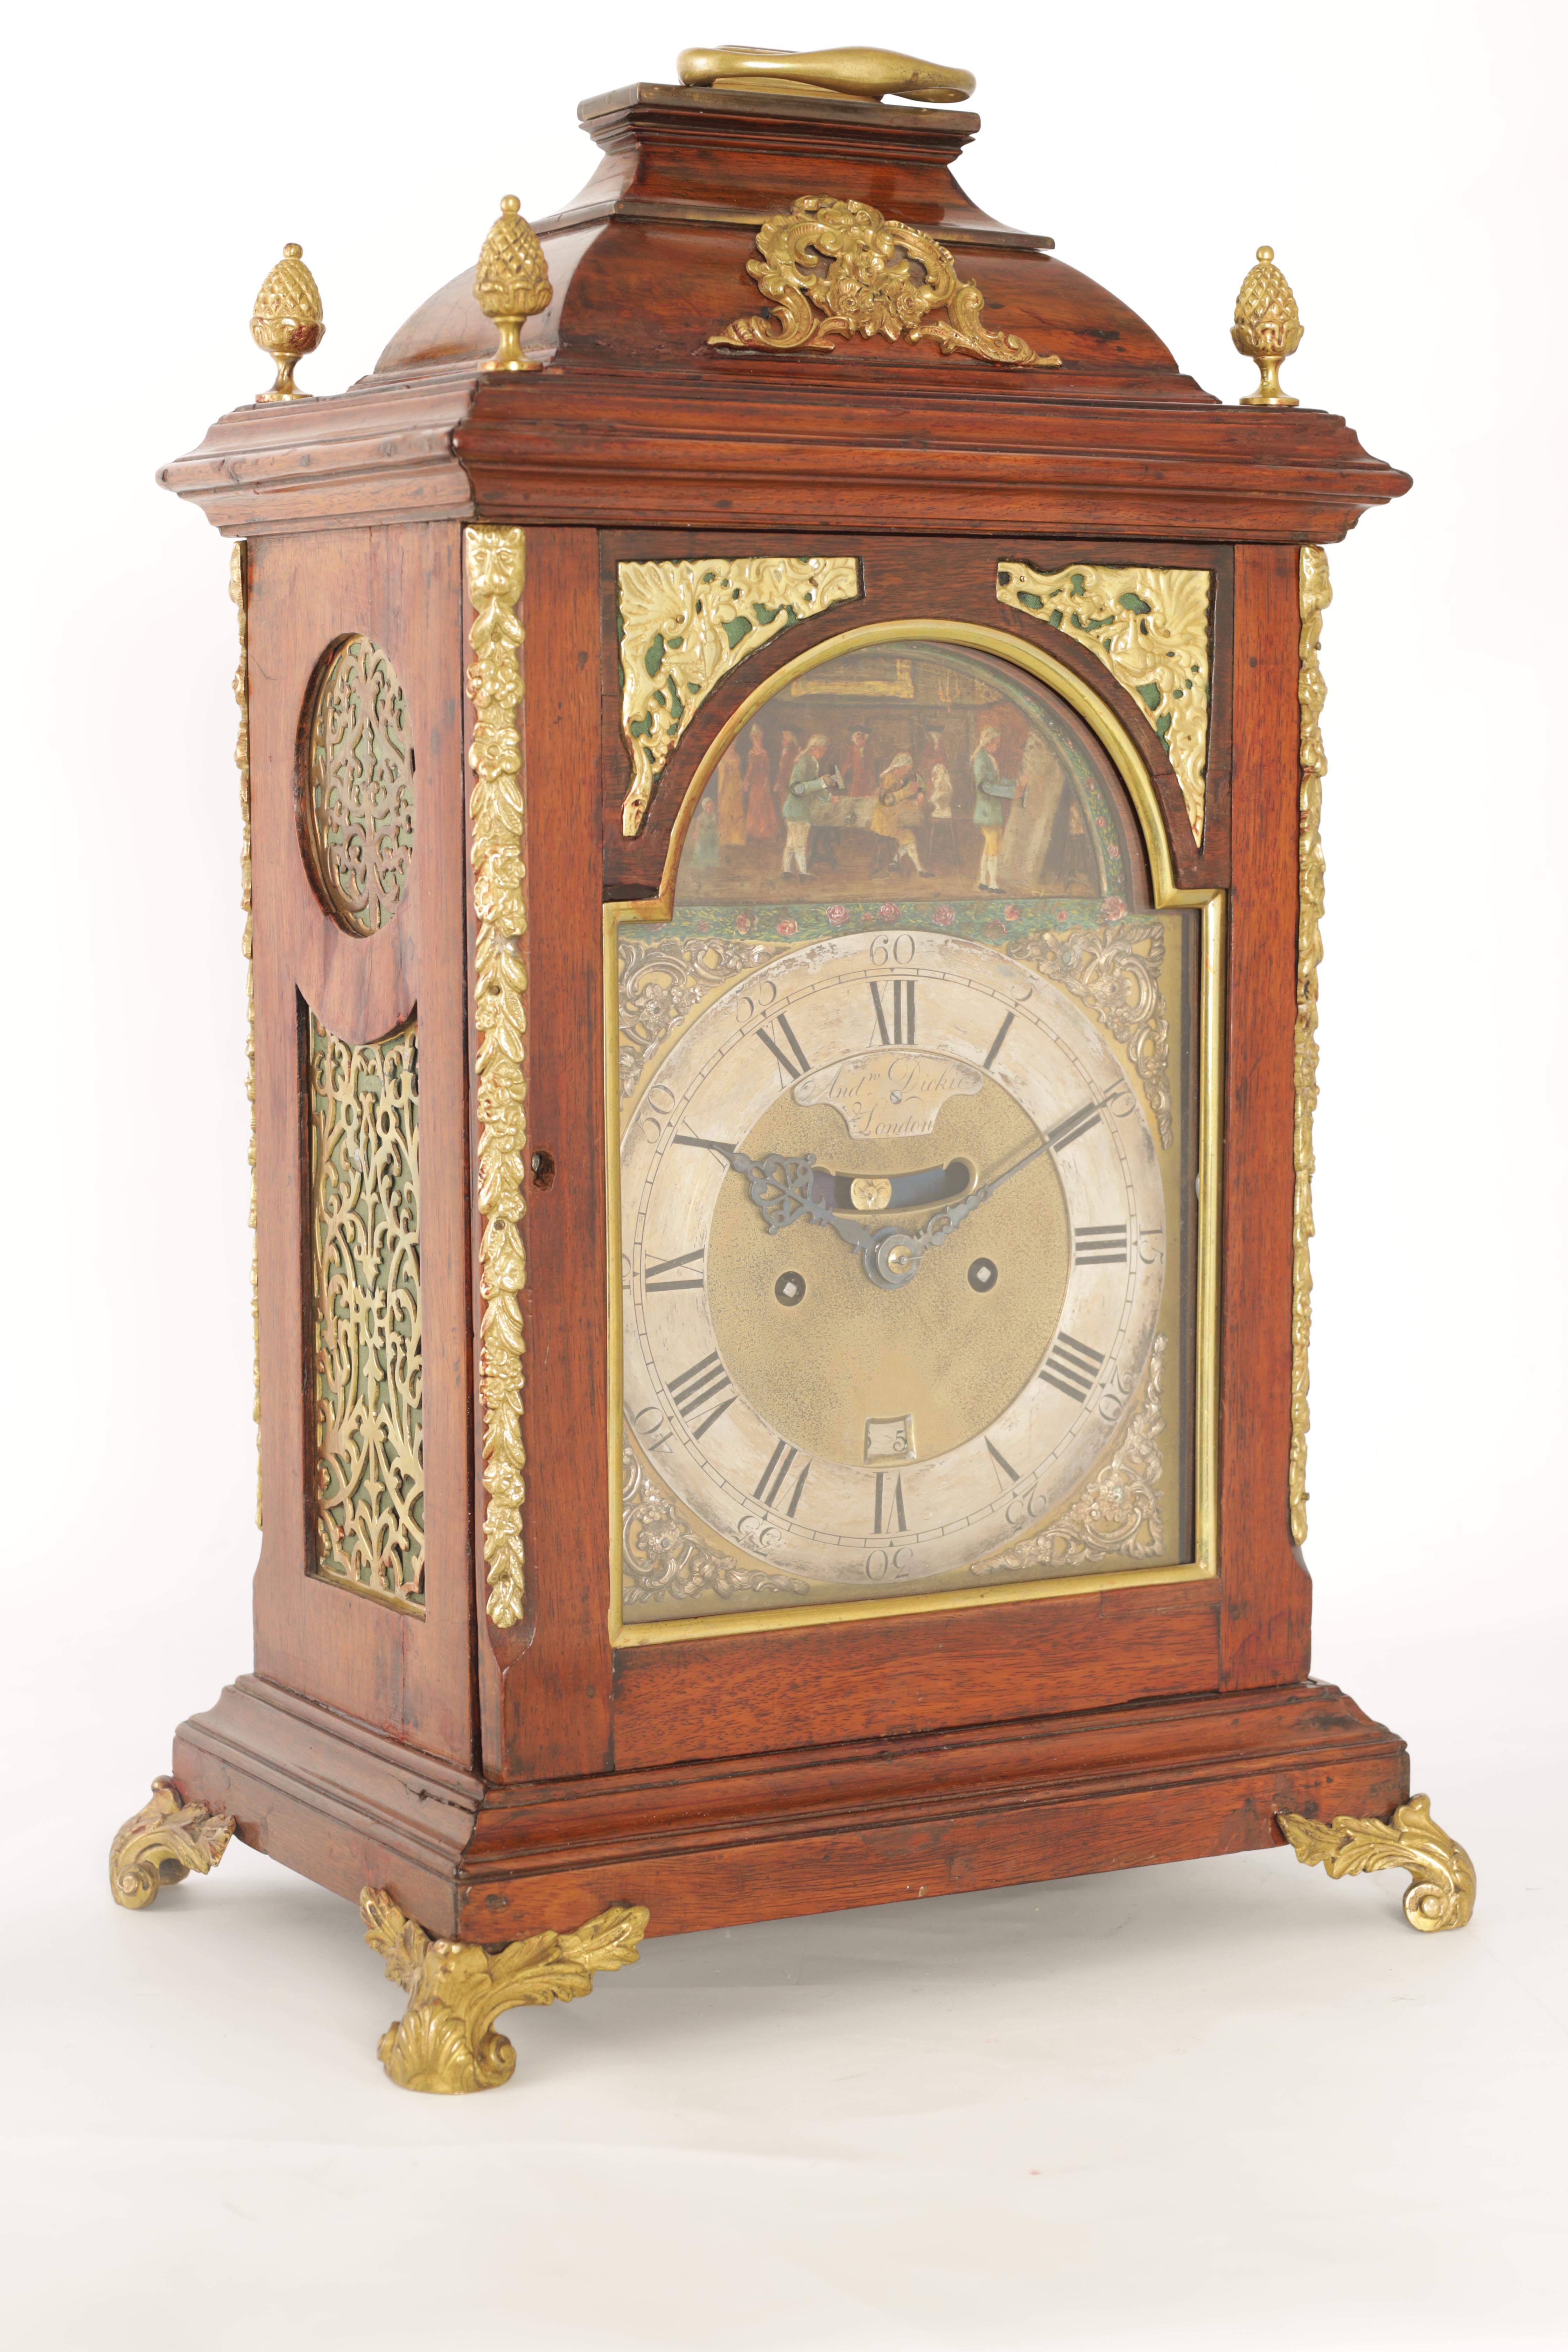 ANDREW DICKIE, LONDON A GEORGE III AUTOMATION VERGE BRACKET CLOCK the ormolu-mounted mahogany case - Image 5 of 10